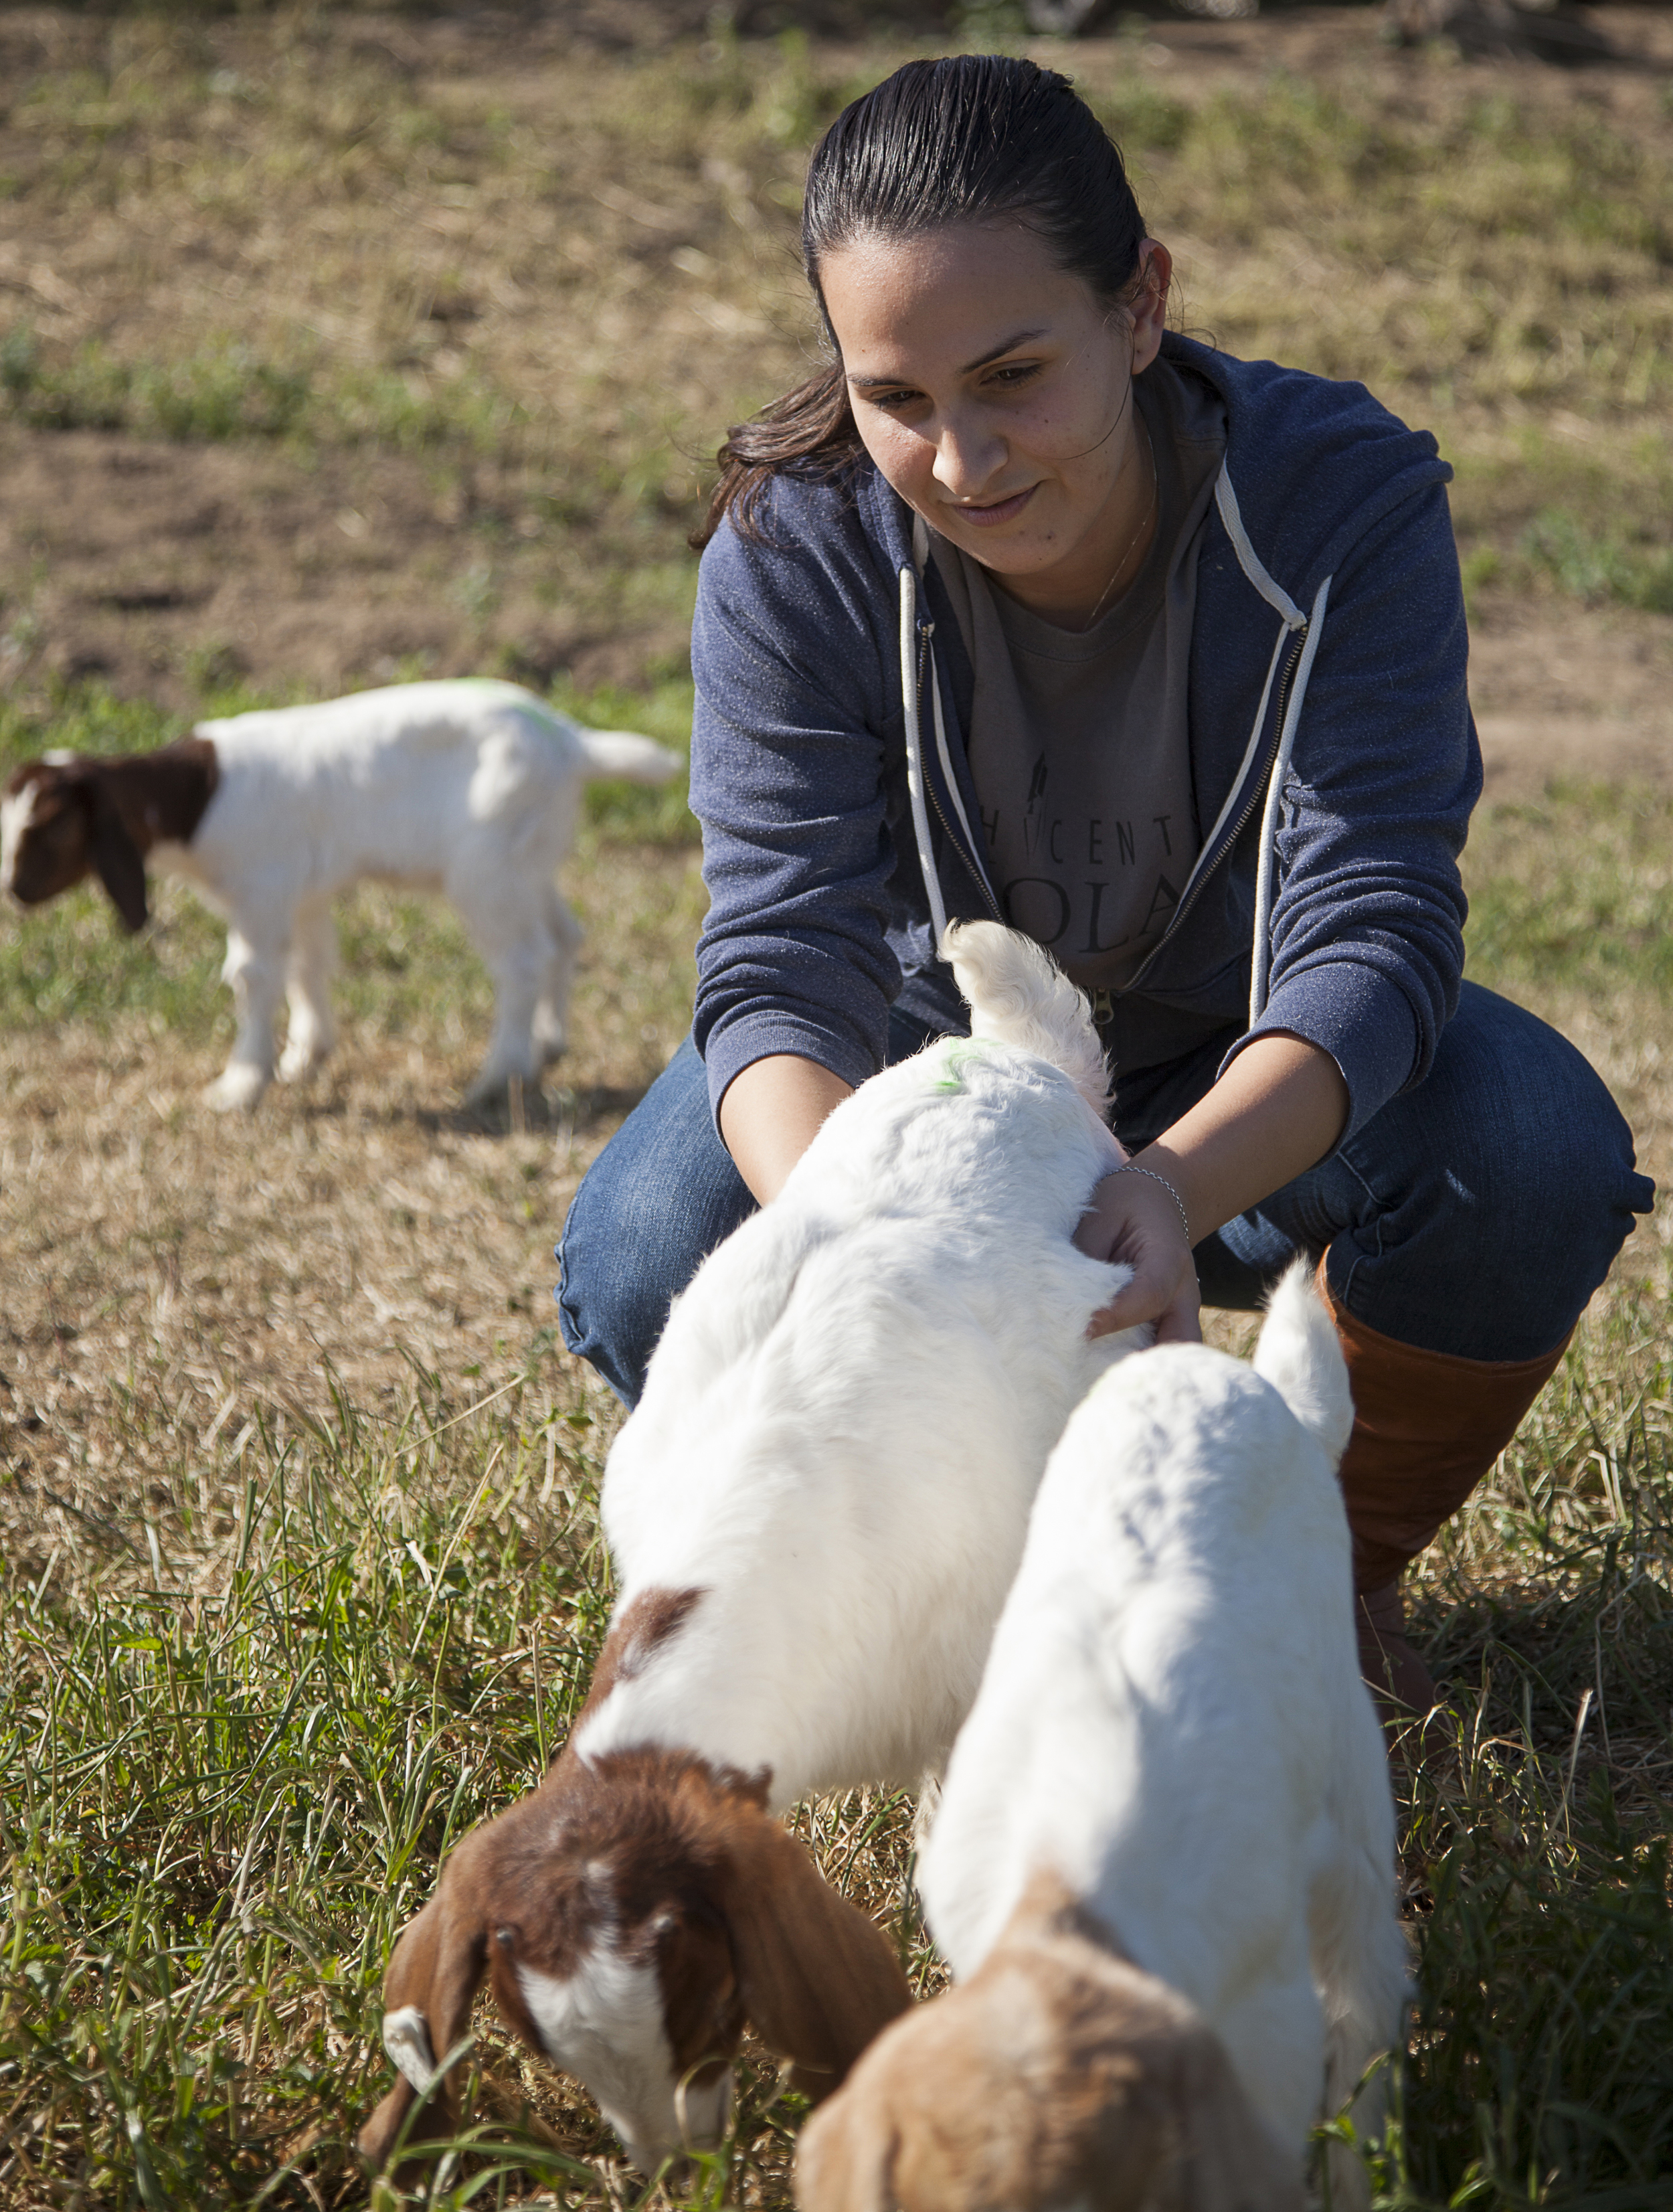  Georgina Martinez looks after two baby goats at the Pierce farm on Friday, March 20, 2015. Woodland Hills, Calif.  Read the full story  here  